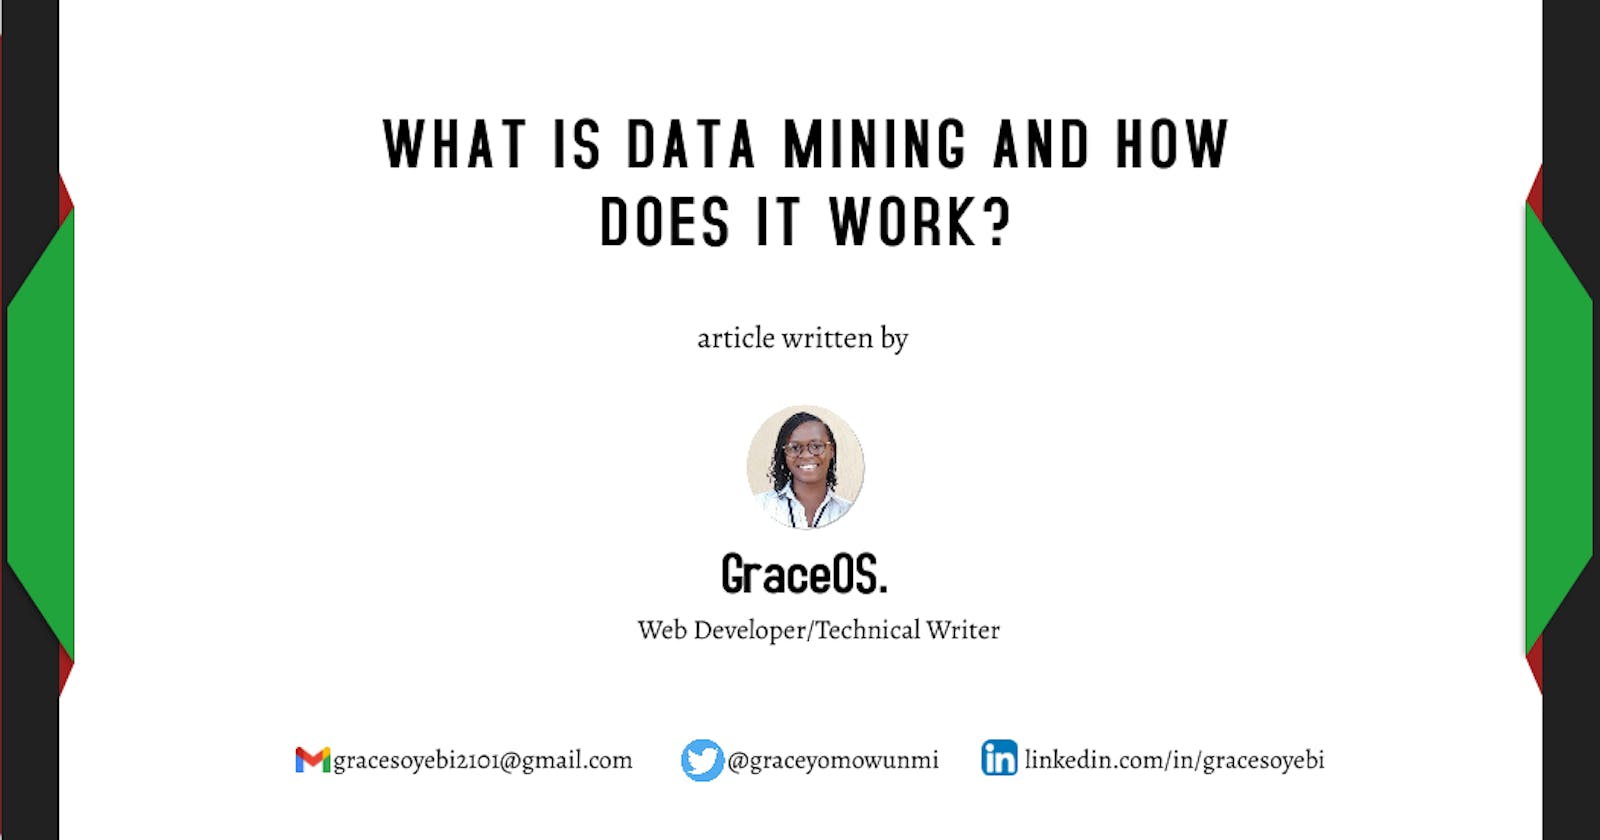 What Is Data Mining And How Does It Work?